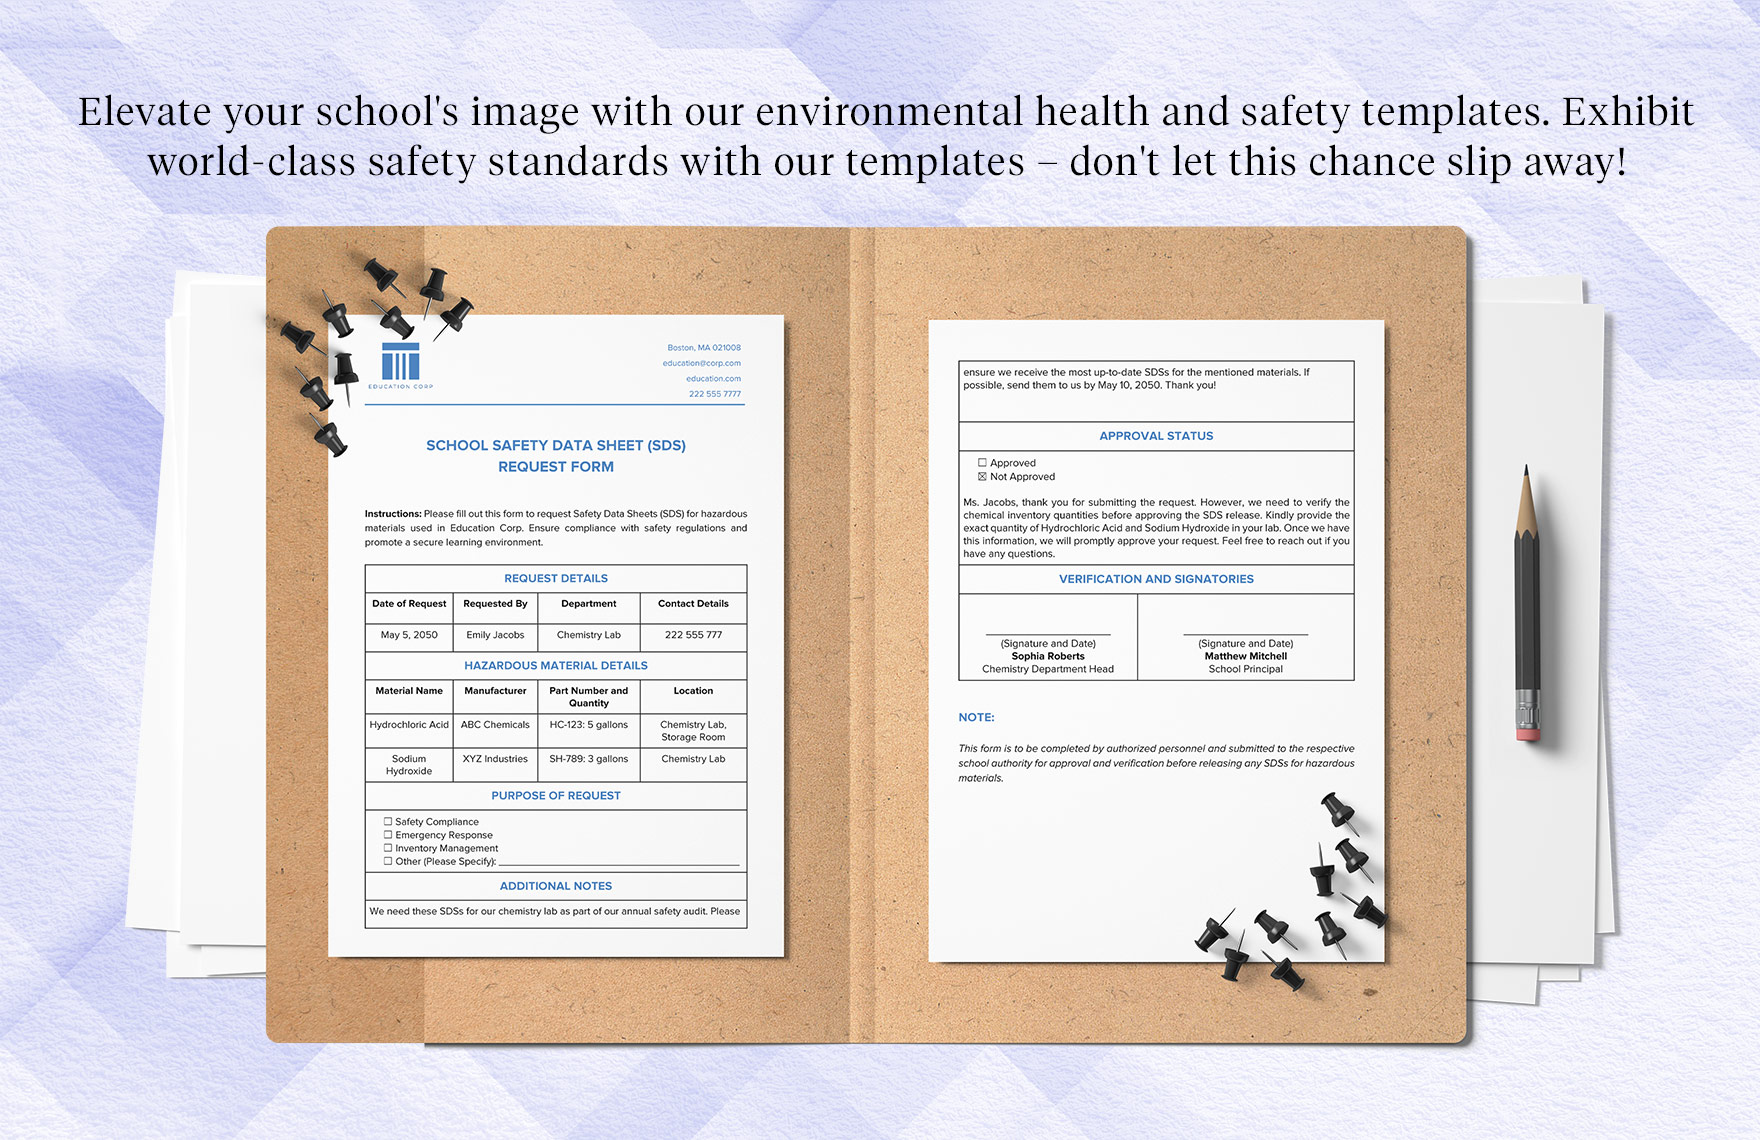 School Safety Data Sheet (SDS) Request Form Template